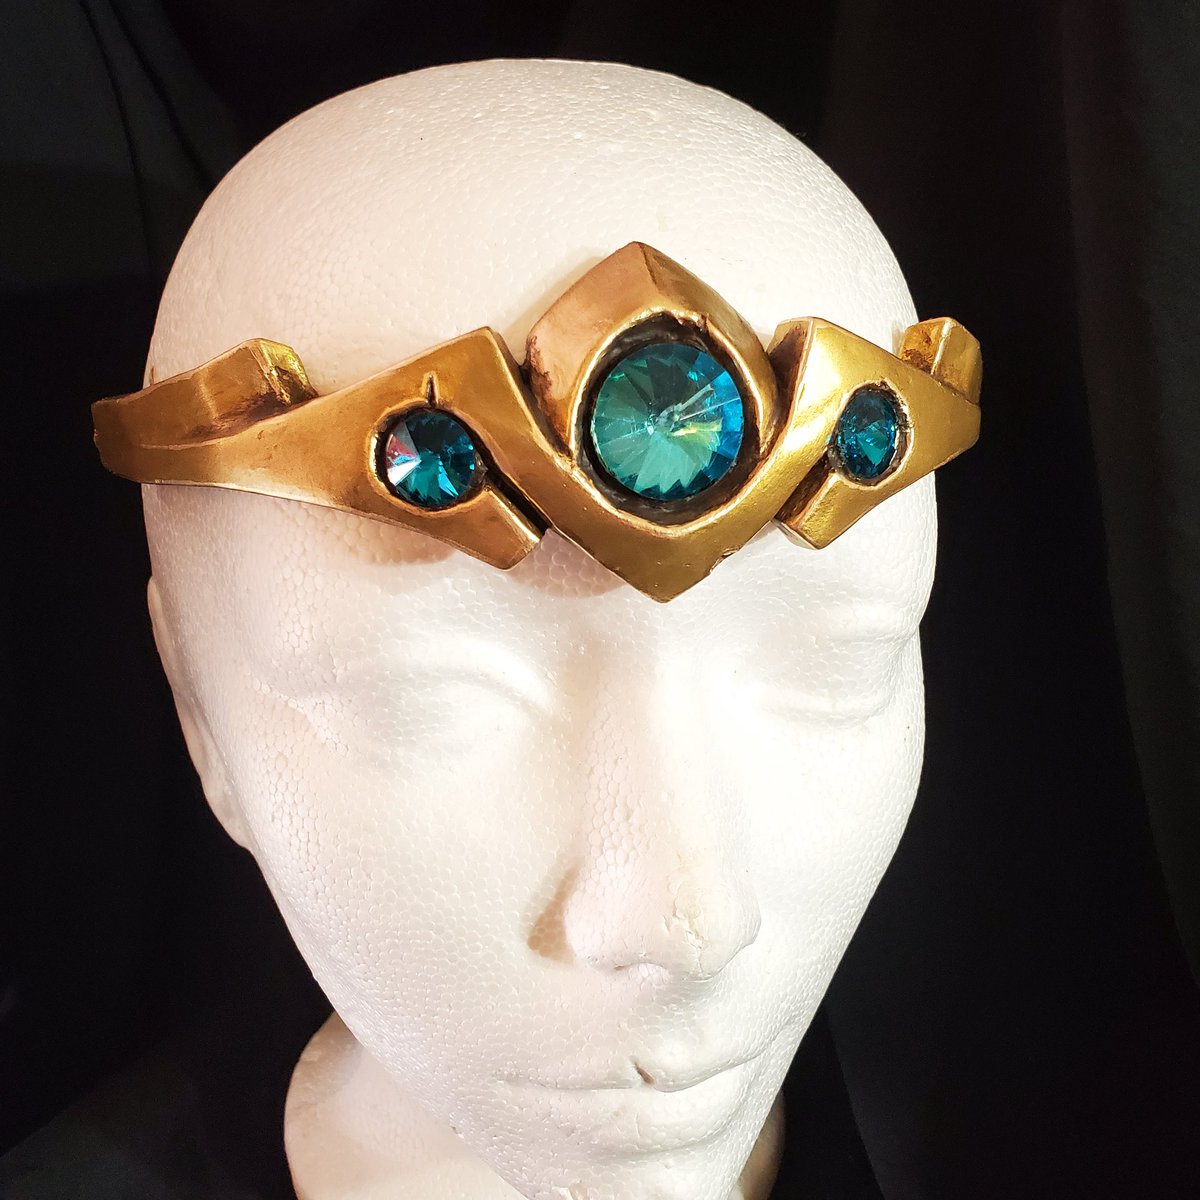 Ok, really proud of this custom #Skyrim Circlet prop commission I finished today. These have been flying out of my shop, and I am so SO grateful to be able to keep the lights on by leveling my Smithing. Made with KX Flex by @SmoothOn and FX paint by @PlaidCrafts! #cosplay